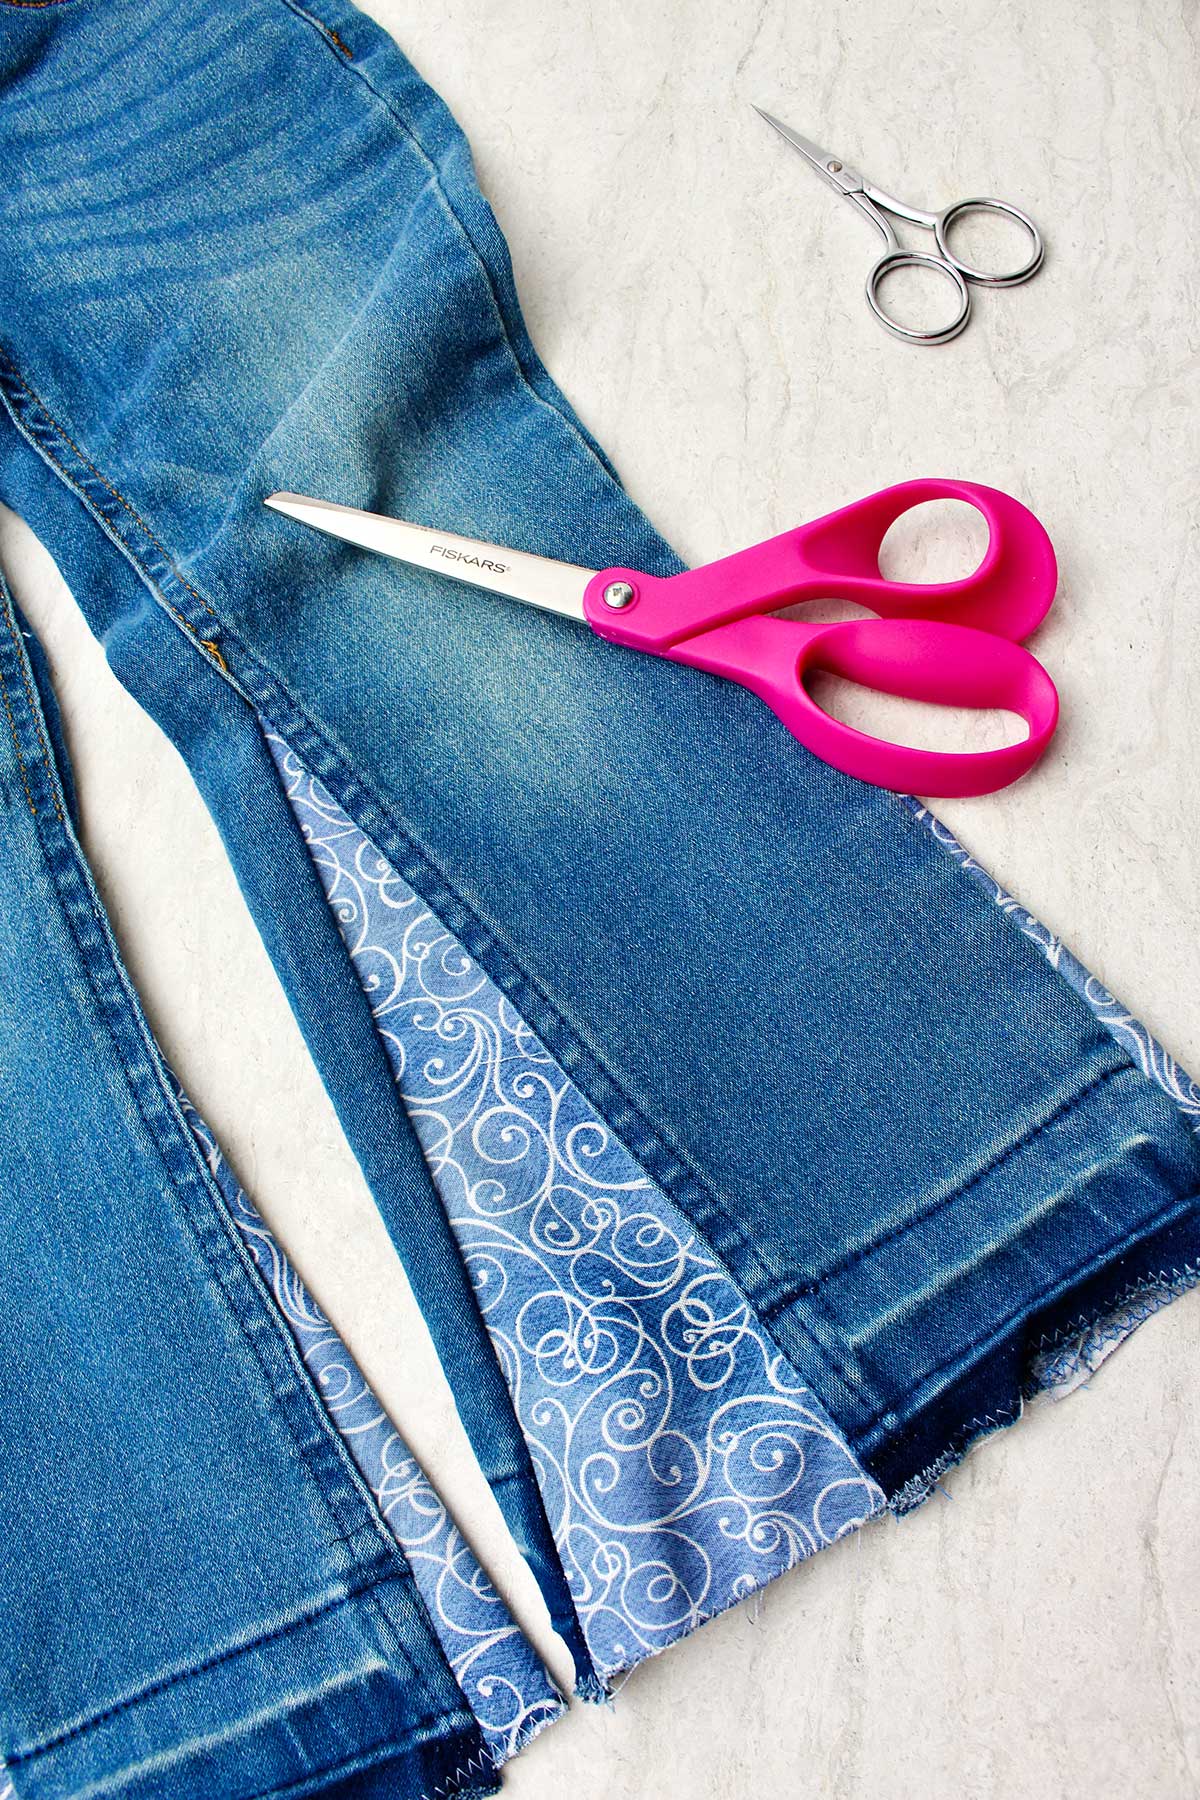 Pair of jeans right side out with decorative fabric sewn on the side to make bell bottoms with two pairs of scissors near by.